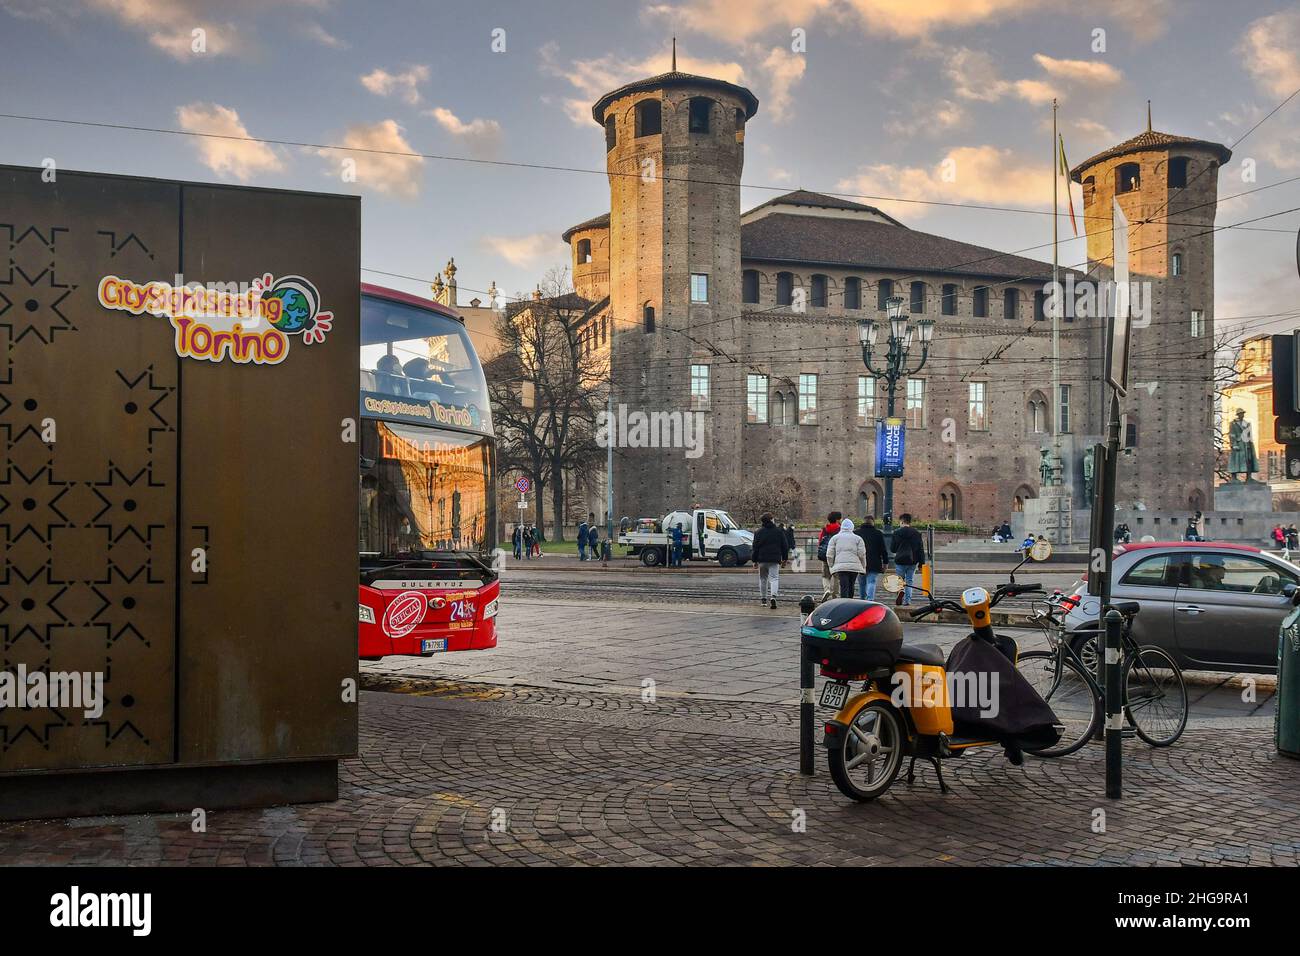 A City Sightseeing tourist bus in Piazza Castello square in front of the Casaforte of Acaja in the center of Turin at sunset, Piedmont, Italy Stock Photo